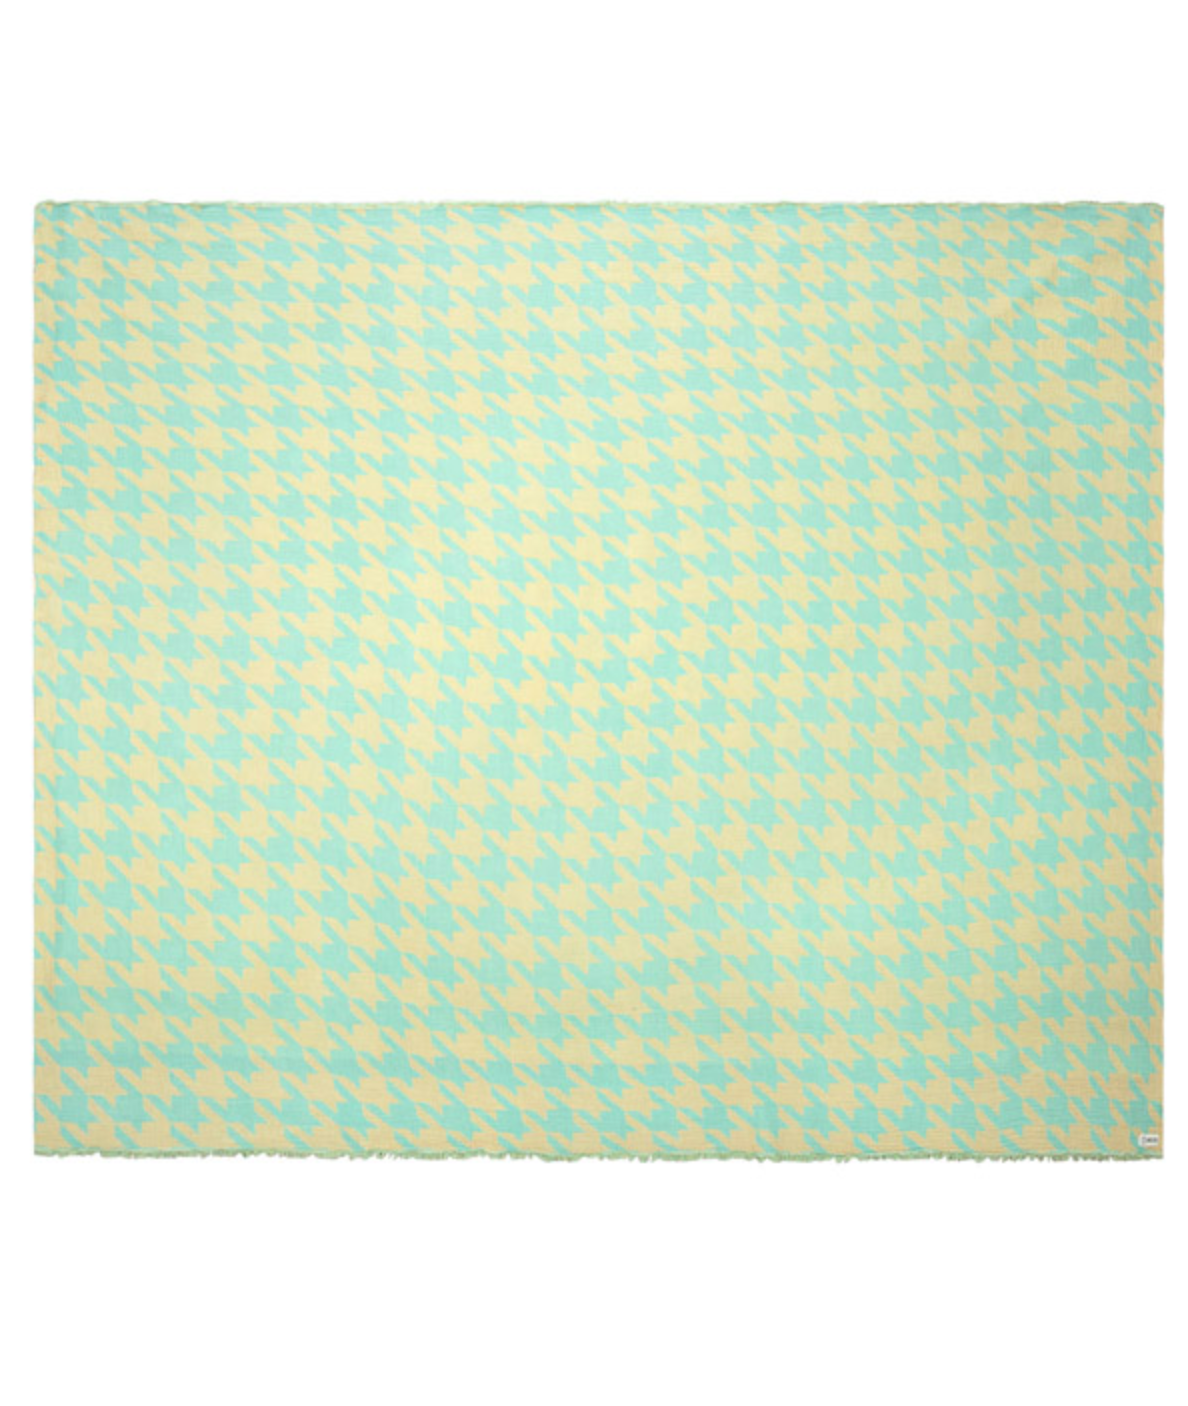 Hounds Sand Cloud Party Blanket